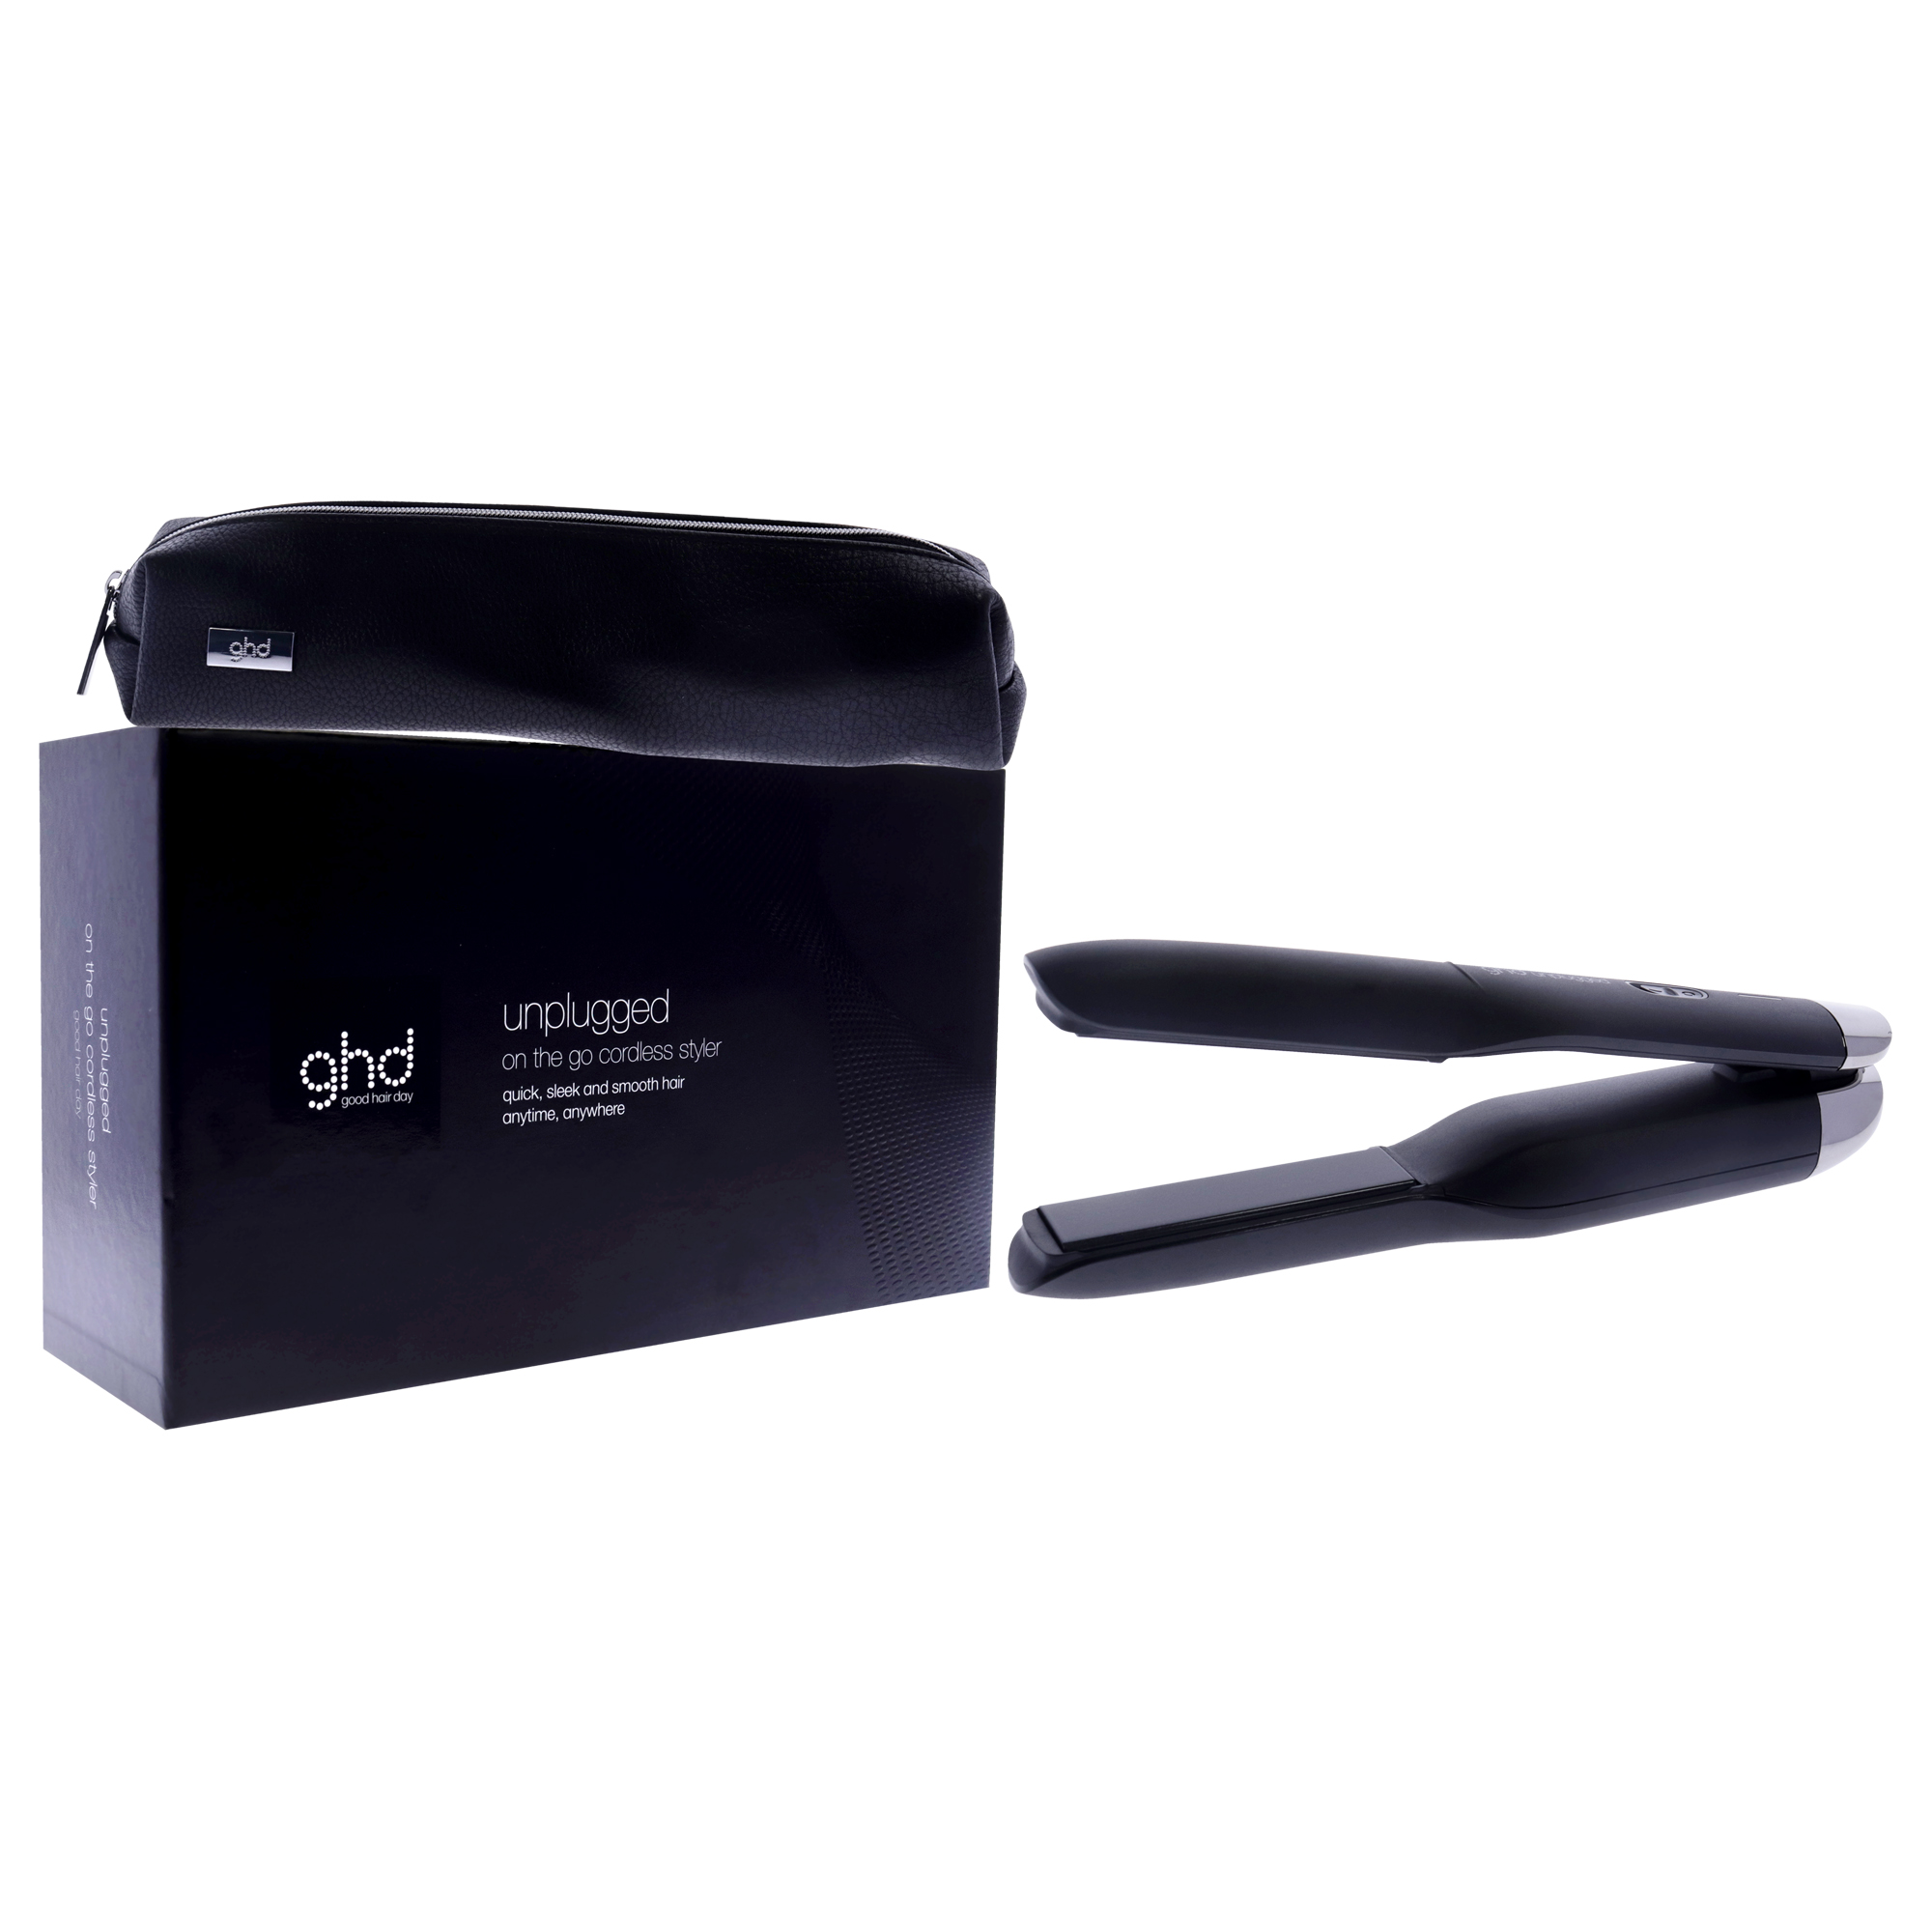 GHD GHD Unplugged Cordless Styler - Black , 1 Inch Flat Iron - image 3 of 5